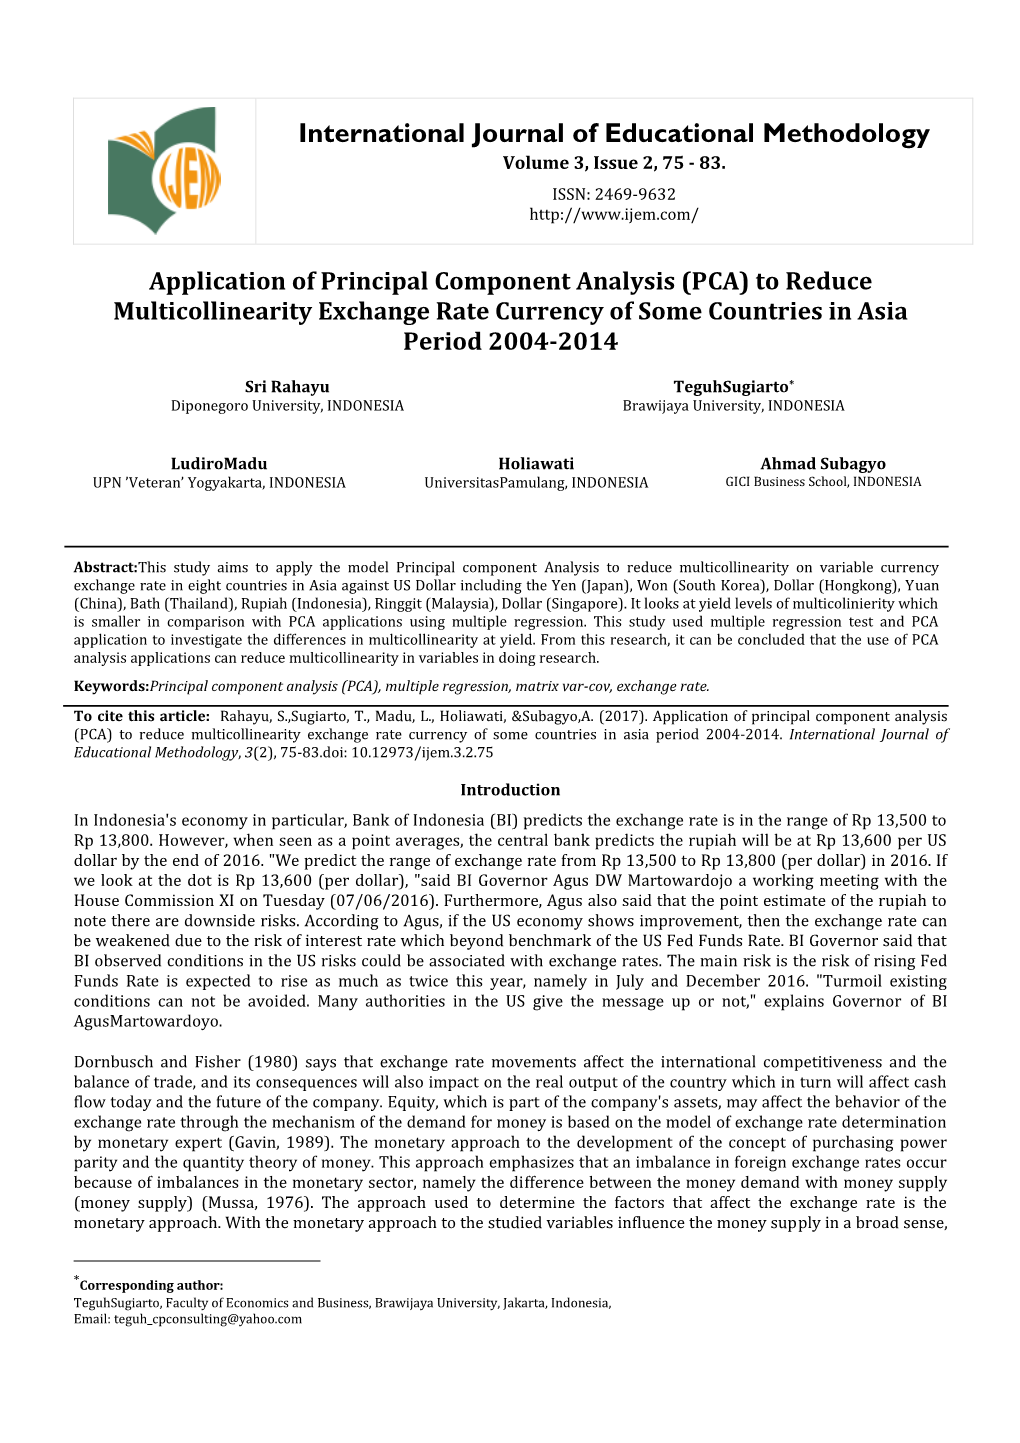 Application of Principal Component Analysis (PCA) to Reduce Multicollinearity Exchange Rate Currency of Some Countries in Asia Period 2004-2014